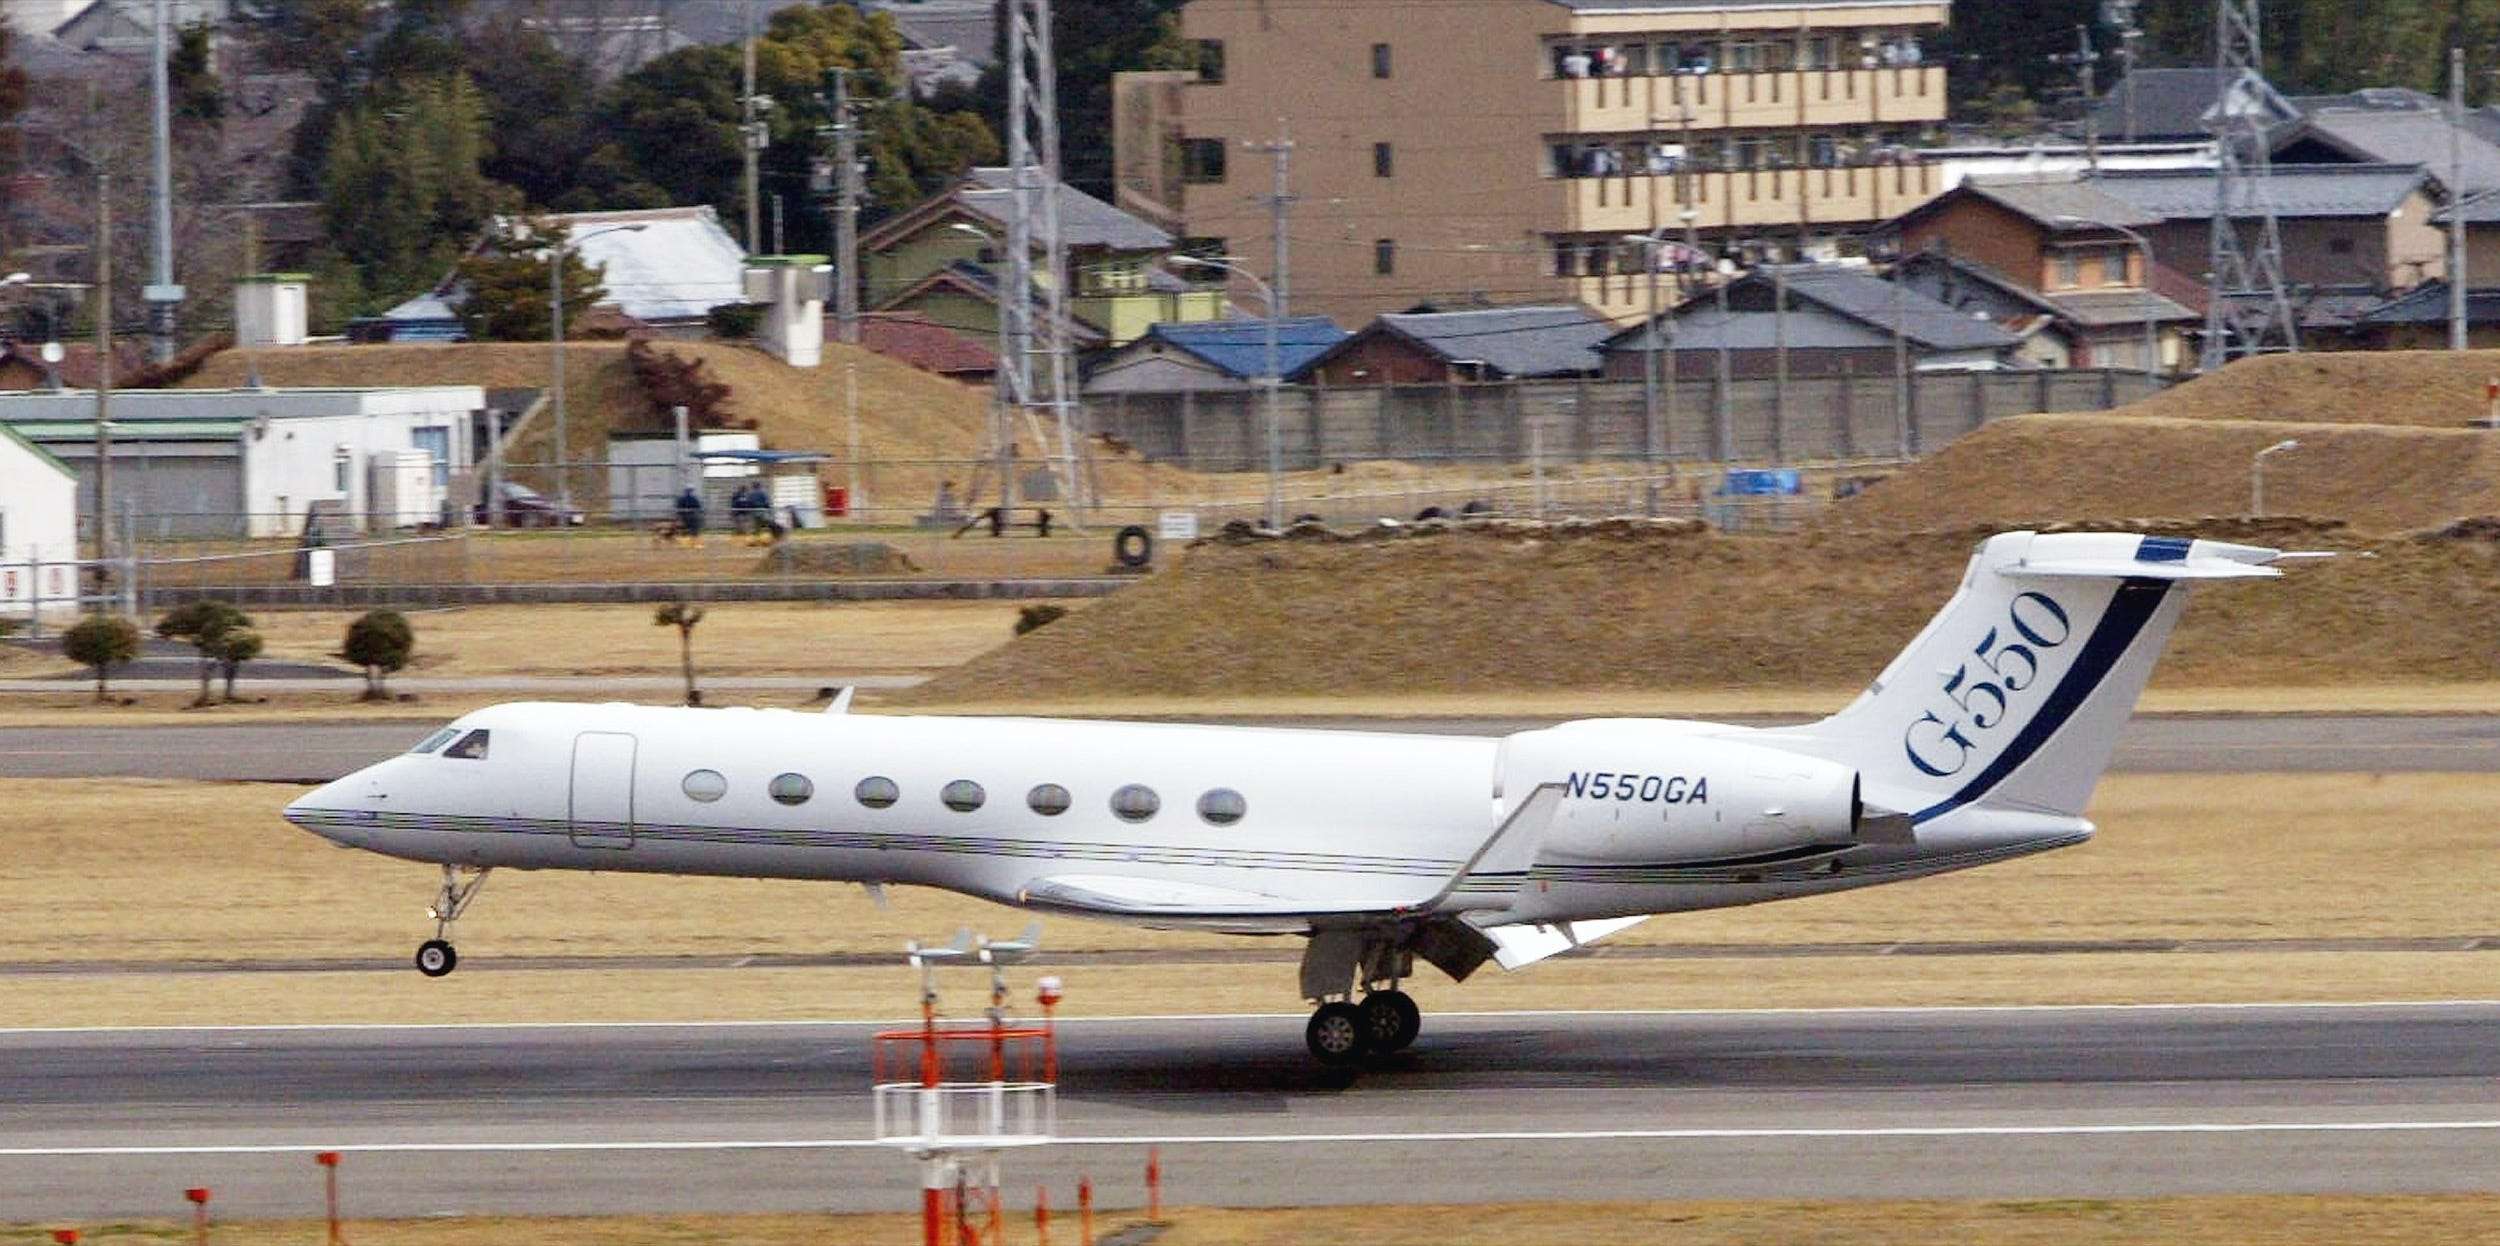 Elon Musk now has another lavish Gulfstream private jet in his arsenal | Business Insider India